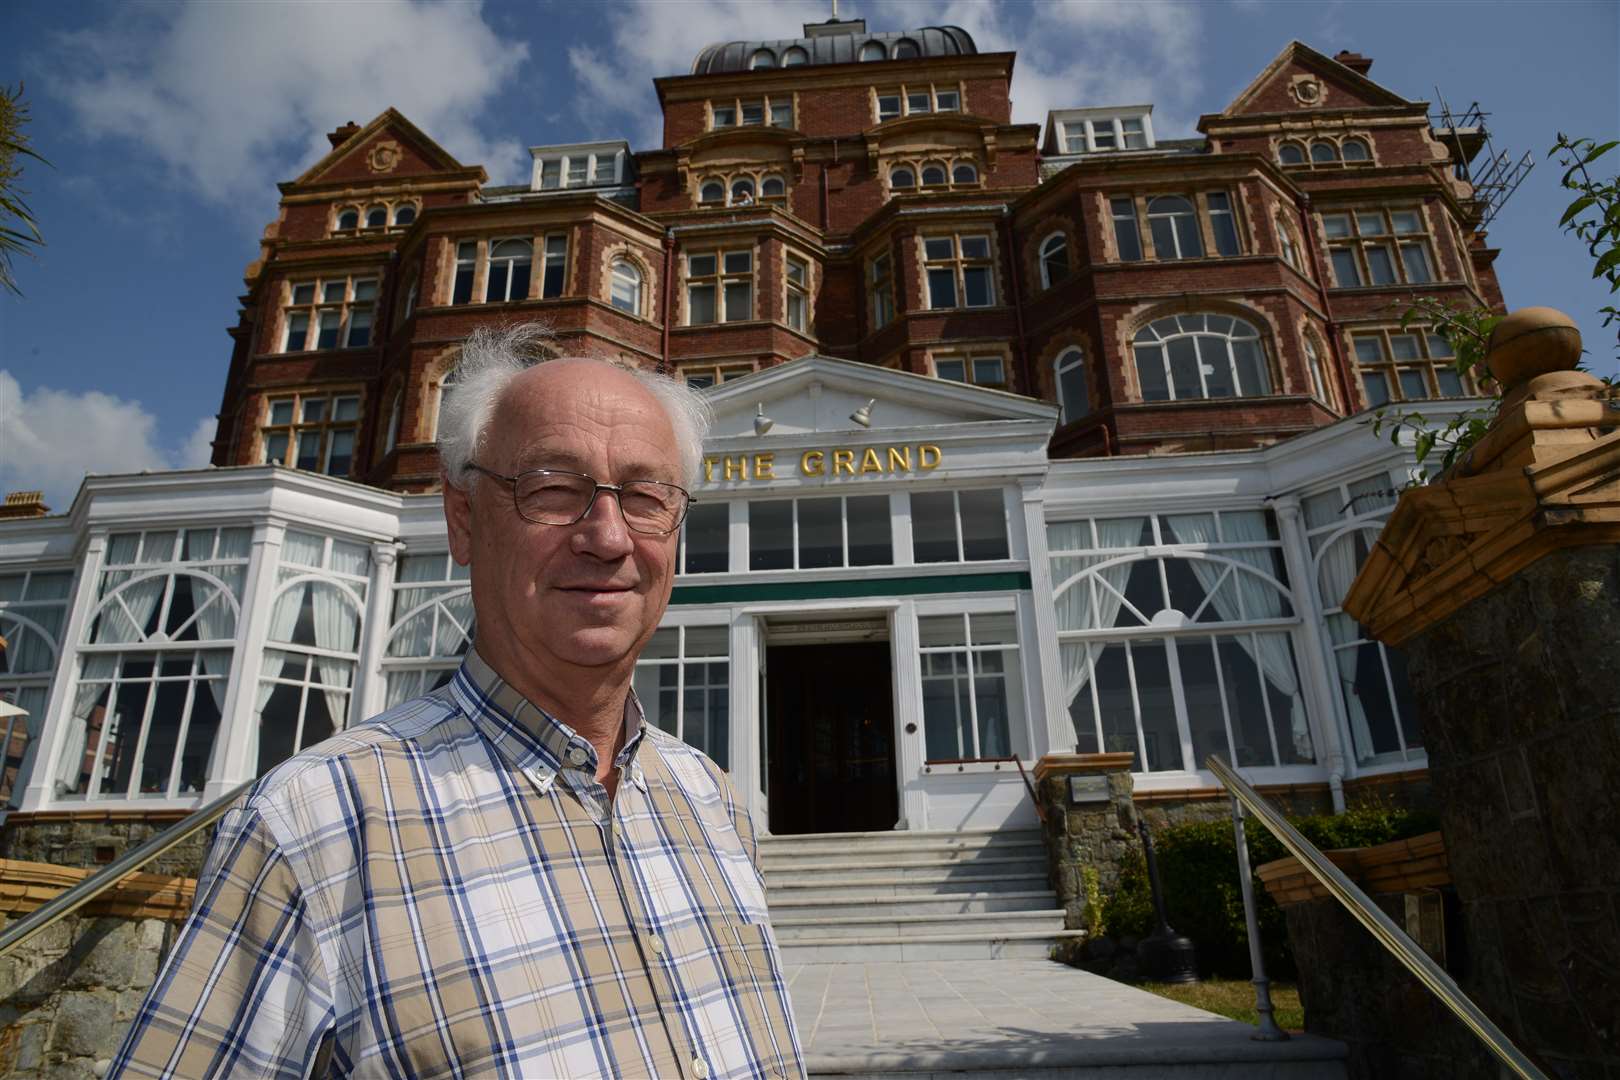 Michael Stainer has owned the Grand Hotel for 40 years